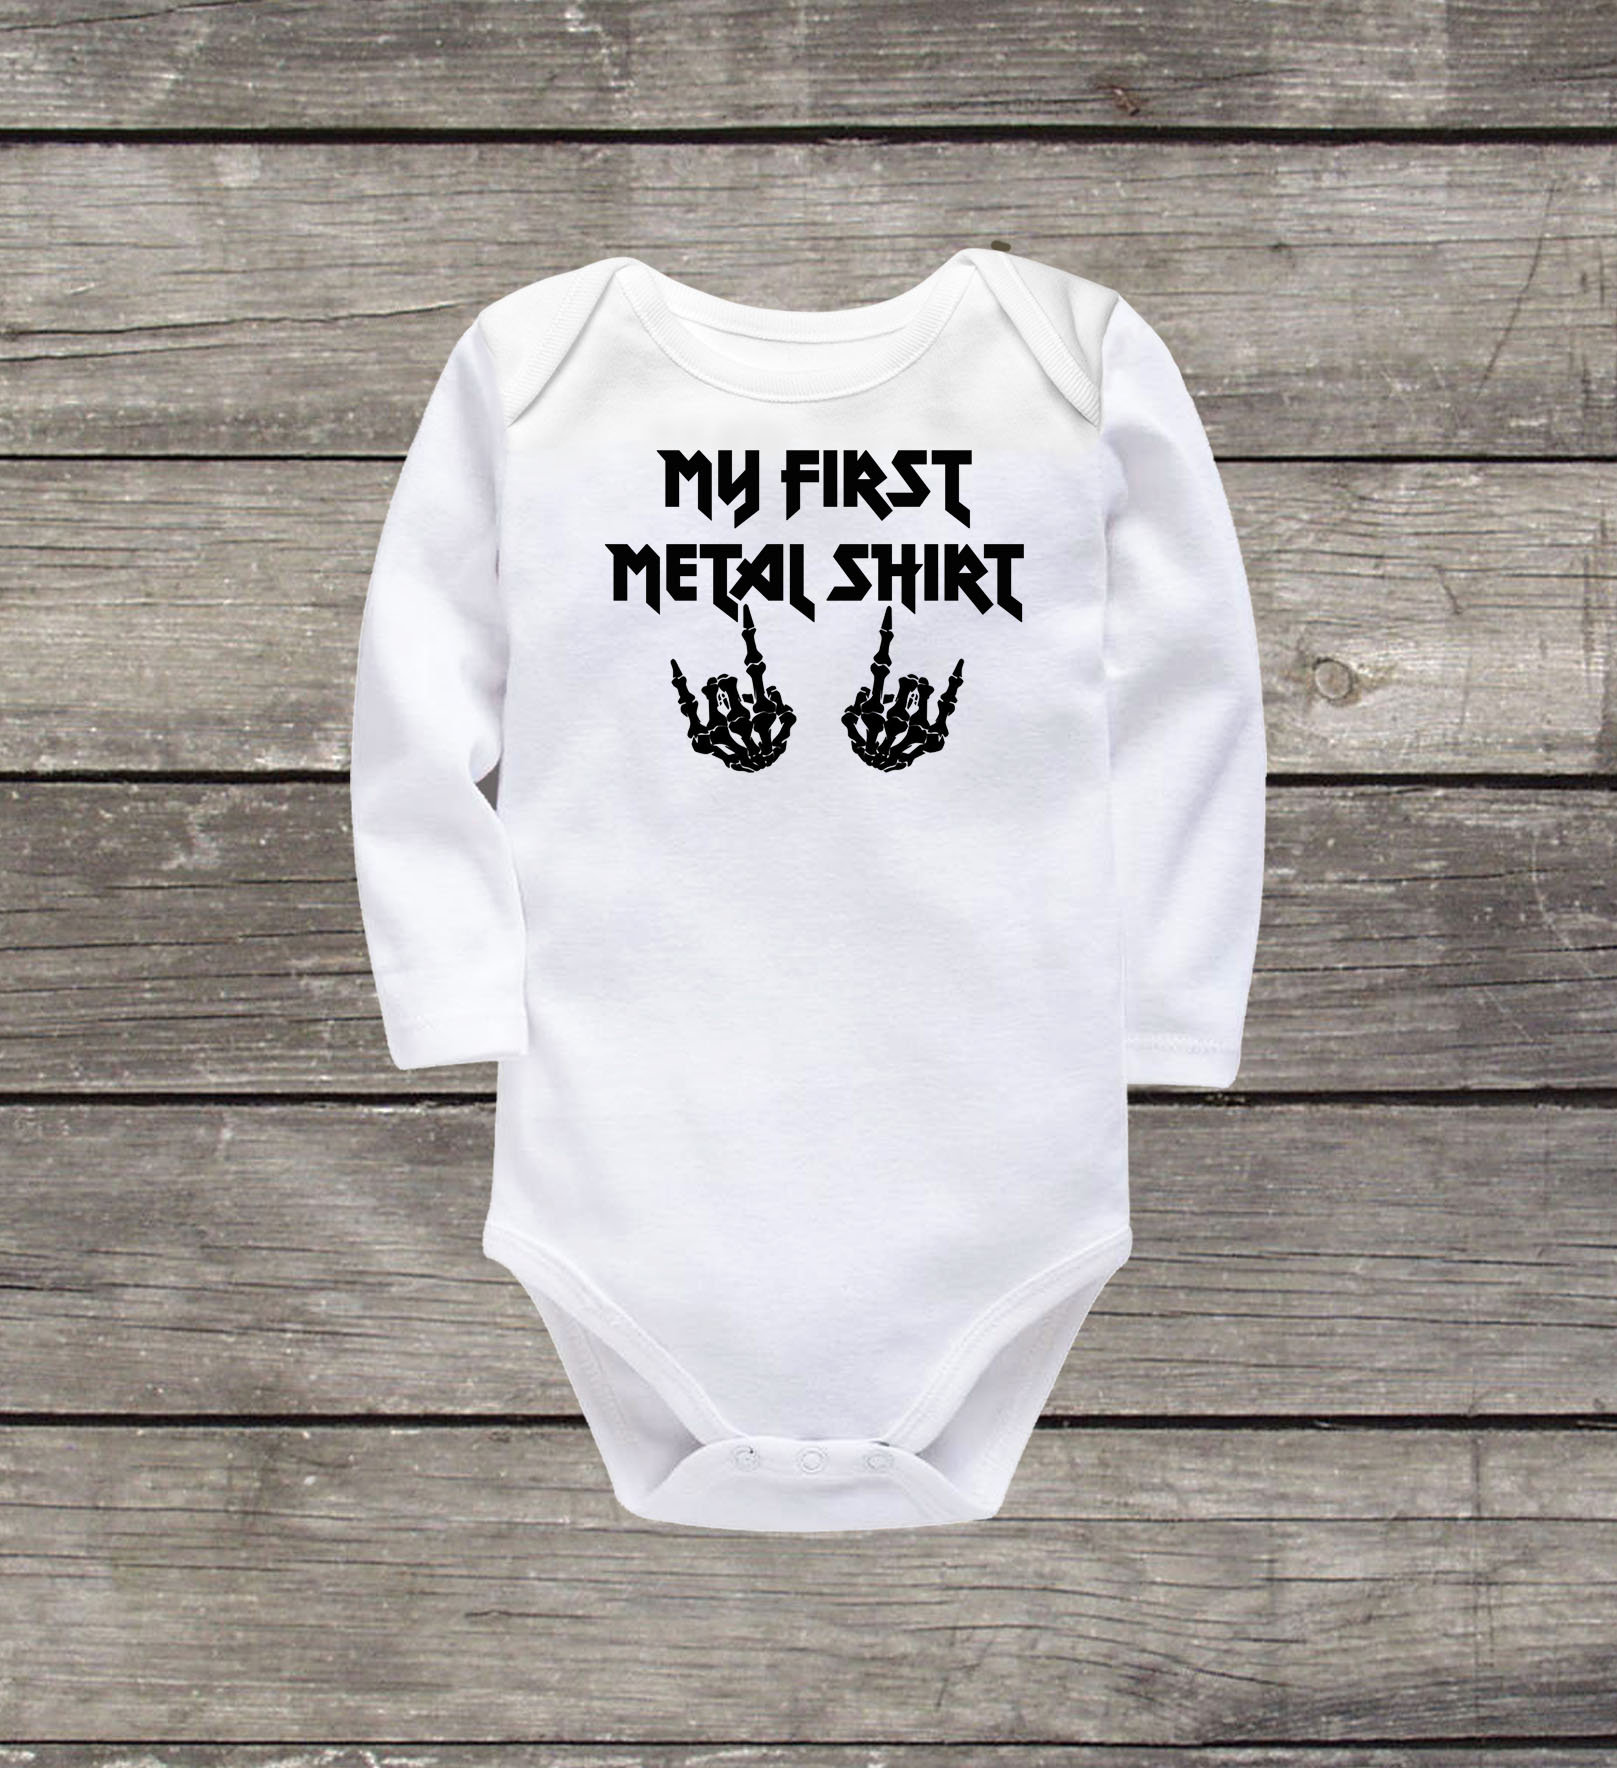 Heavy Metal Baby Bodysuit, My First Metal Shirt, Rock Band Baby Clothes,  Funny Baby Clothes, Hipster Baby Clothes, Rocker, Baby Announcement 